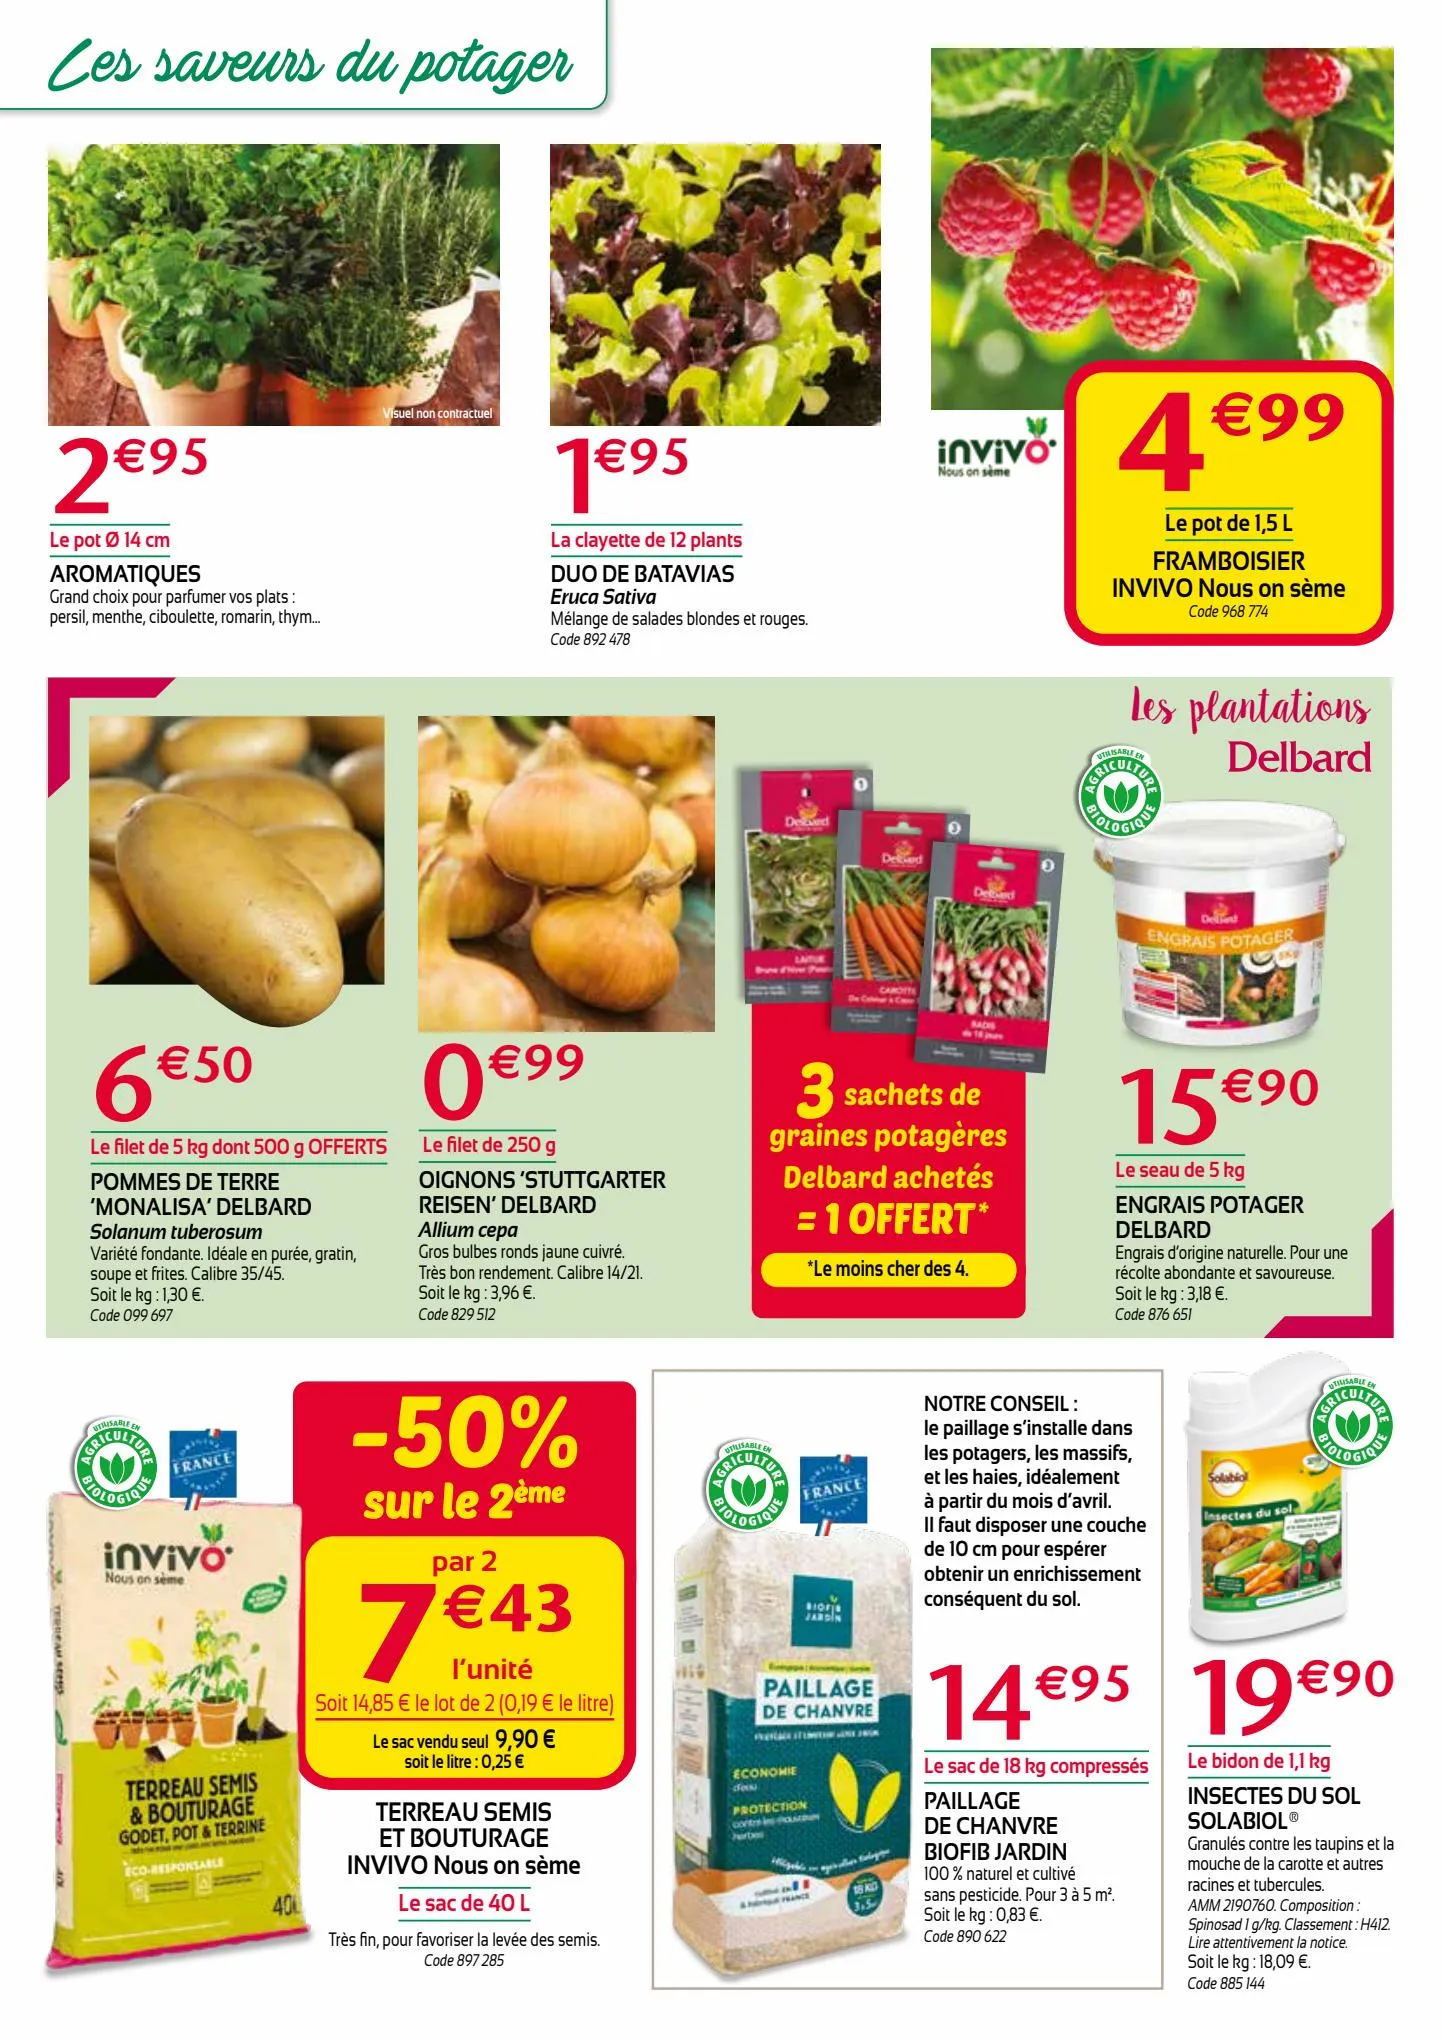 Catalogue Jardin Potager Animaux Outillage, page 00002